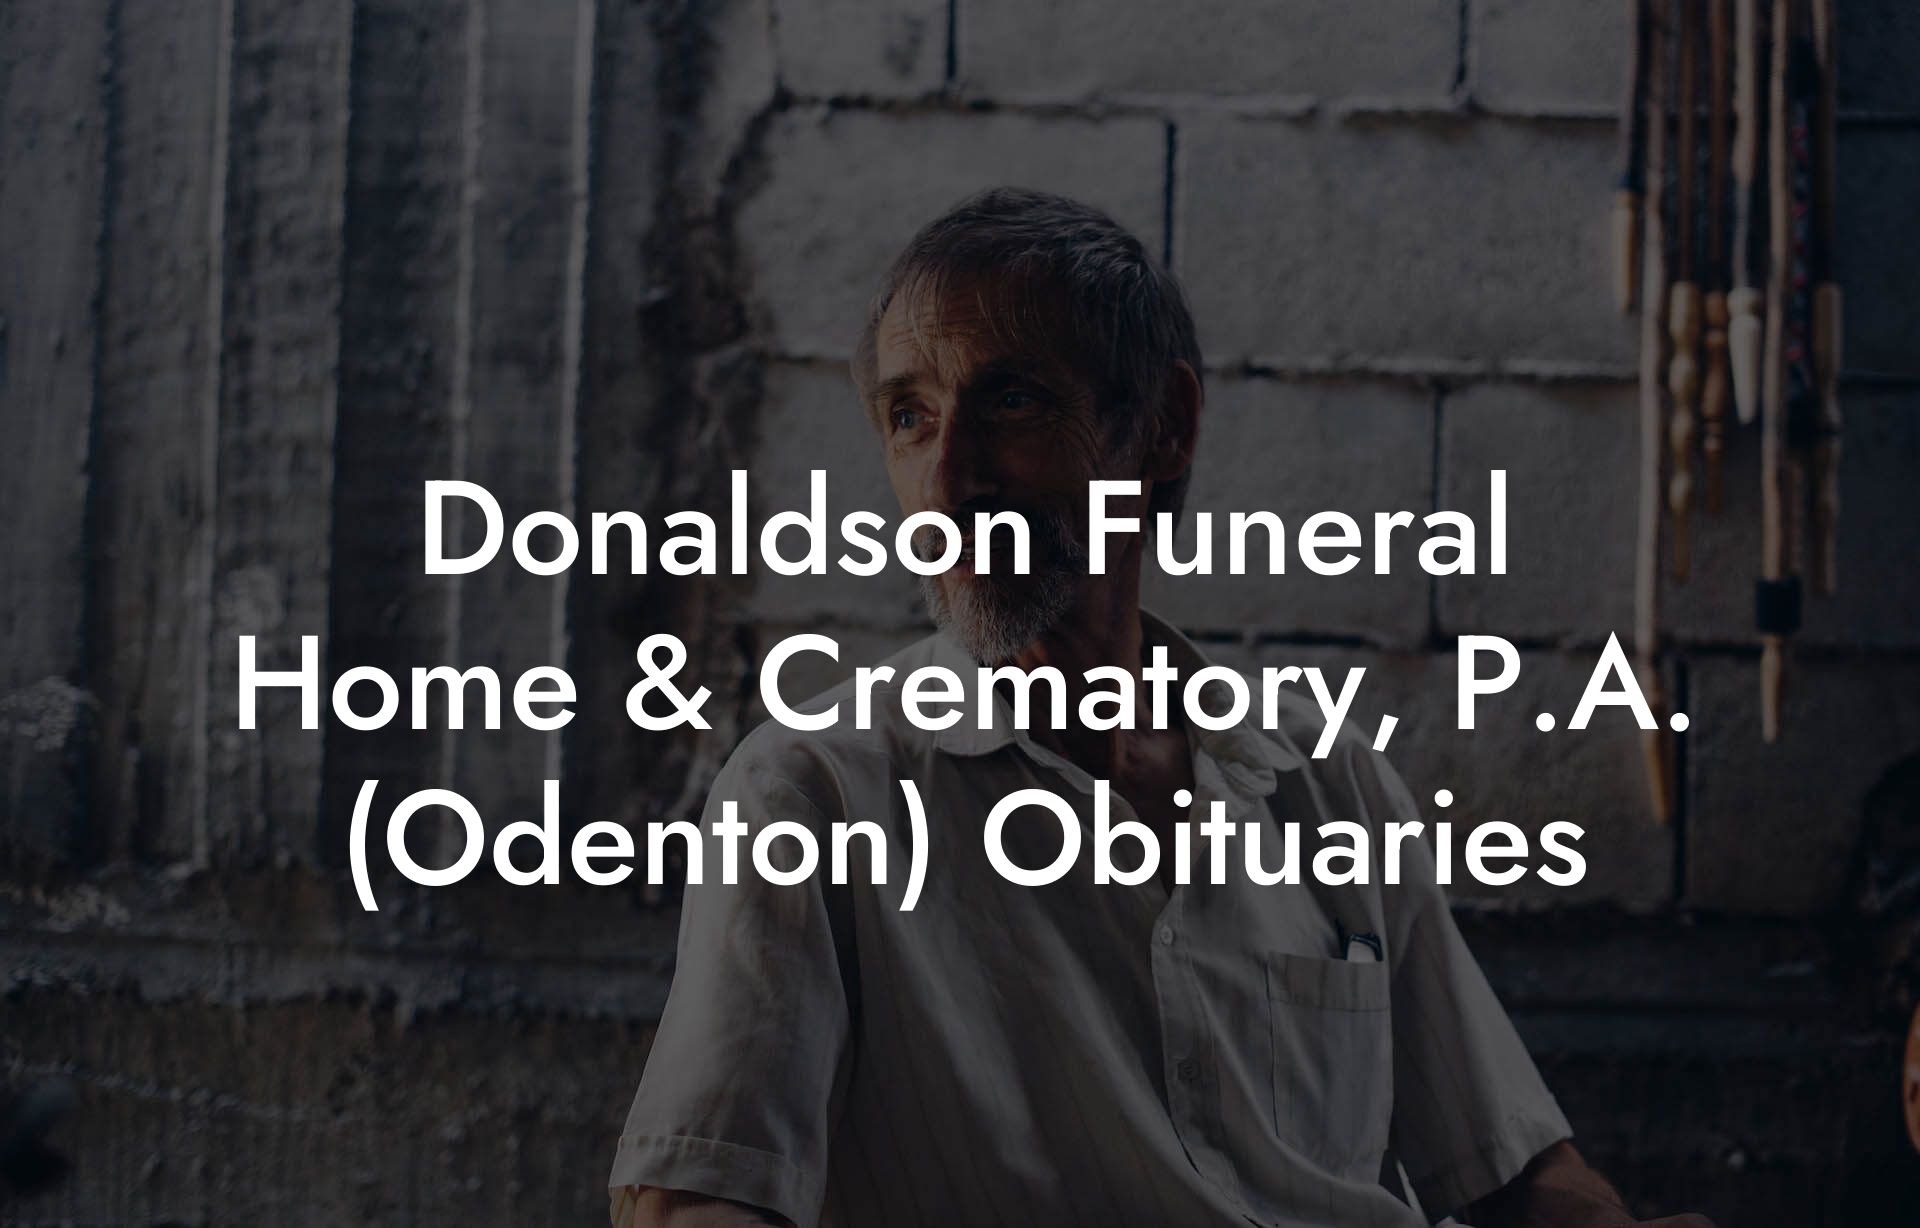 Donaldson Funeral Home & Crematory, P.A. (Odenton) Obituaries